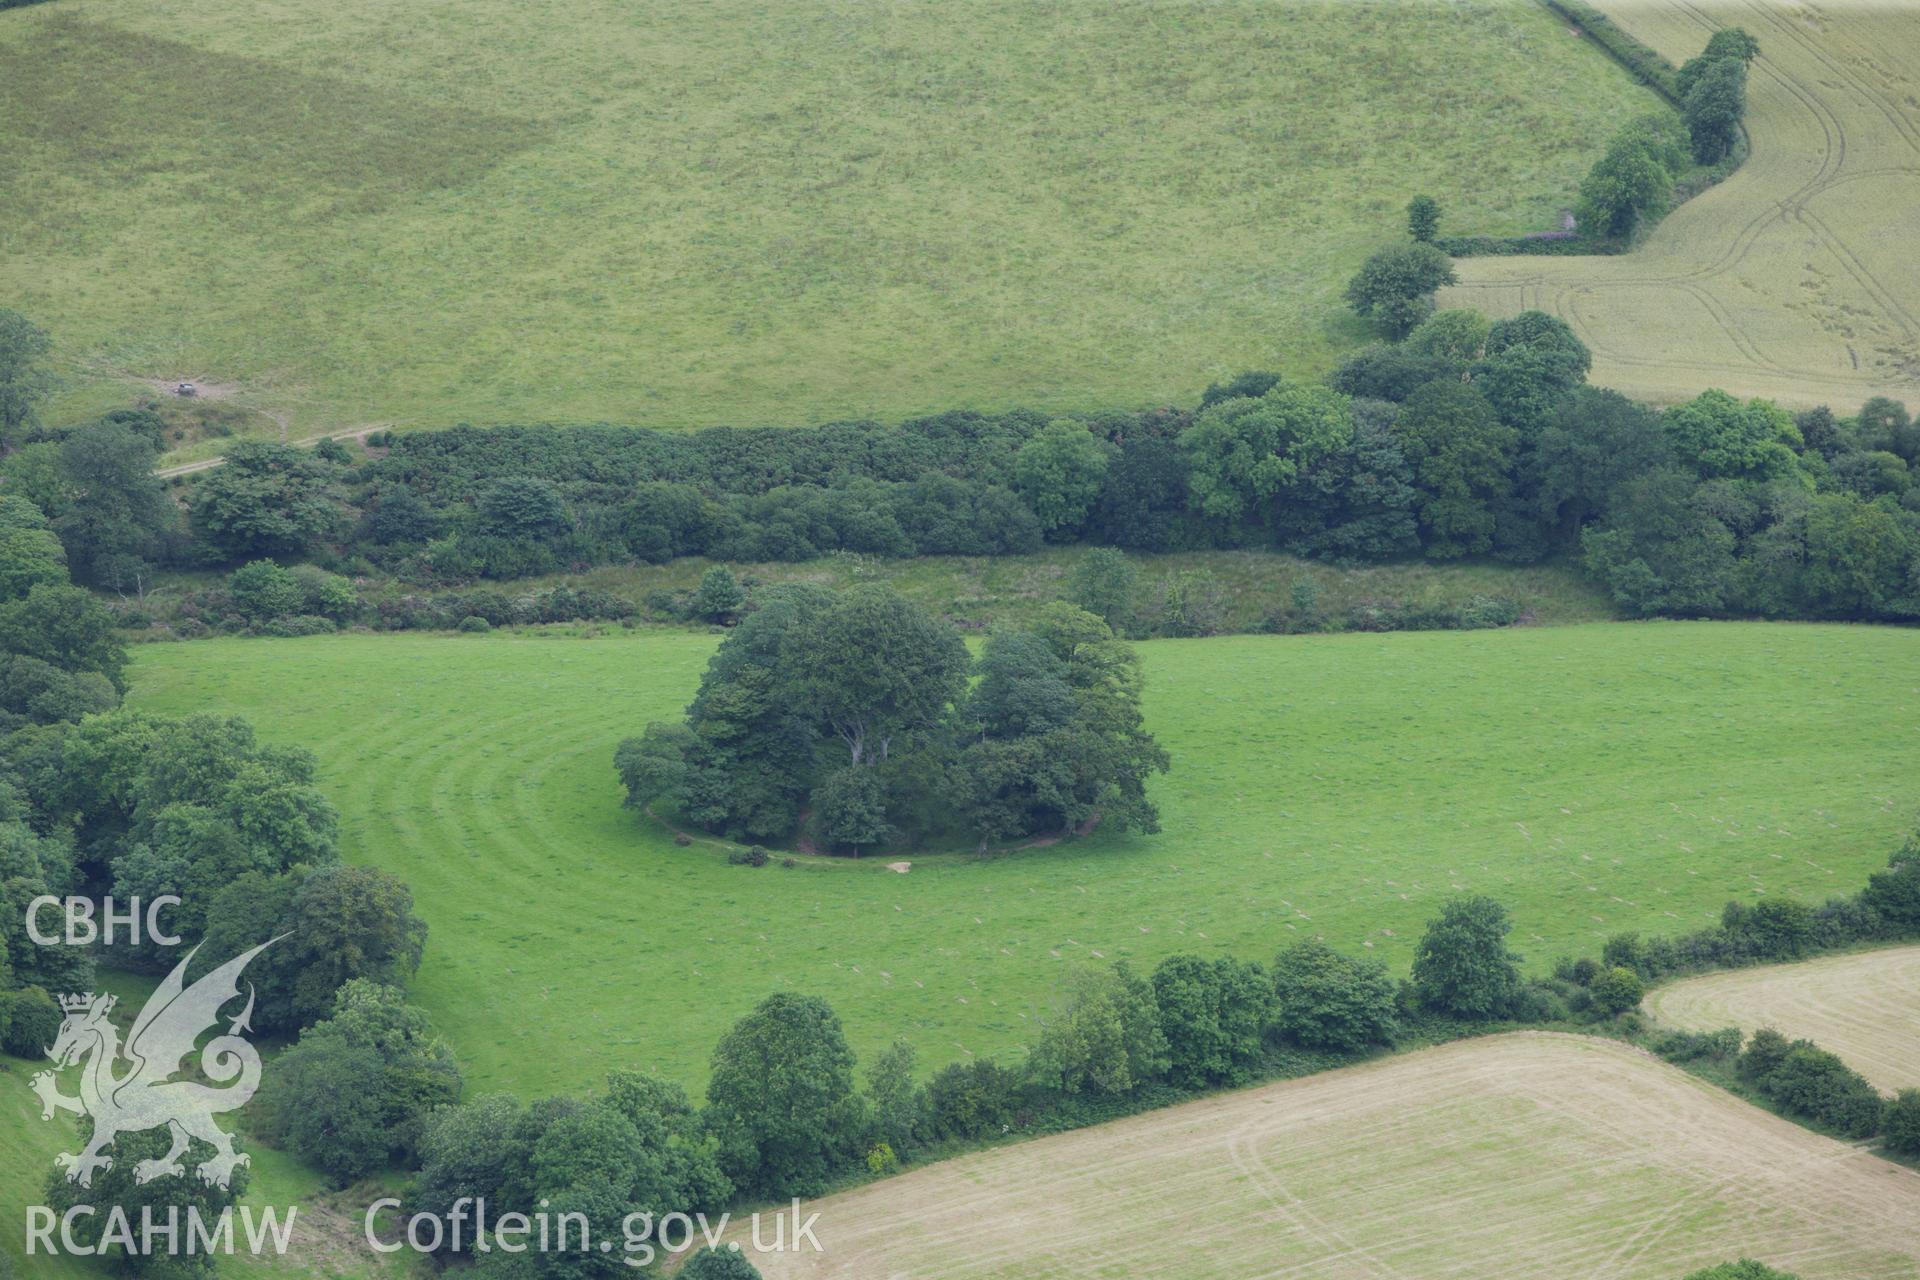 RCAHMW colour oblique aerial photograph of Parc-y-Domen, Castell Dyffryn Mawr. Taken on 09 July 2009 by Toby Driver